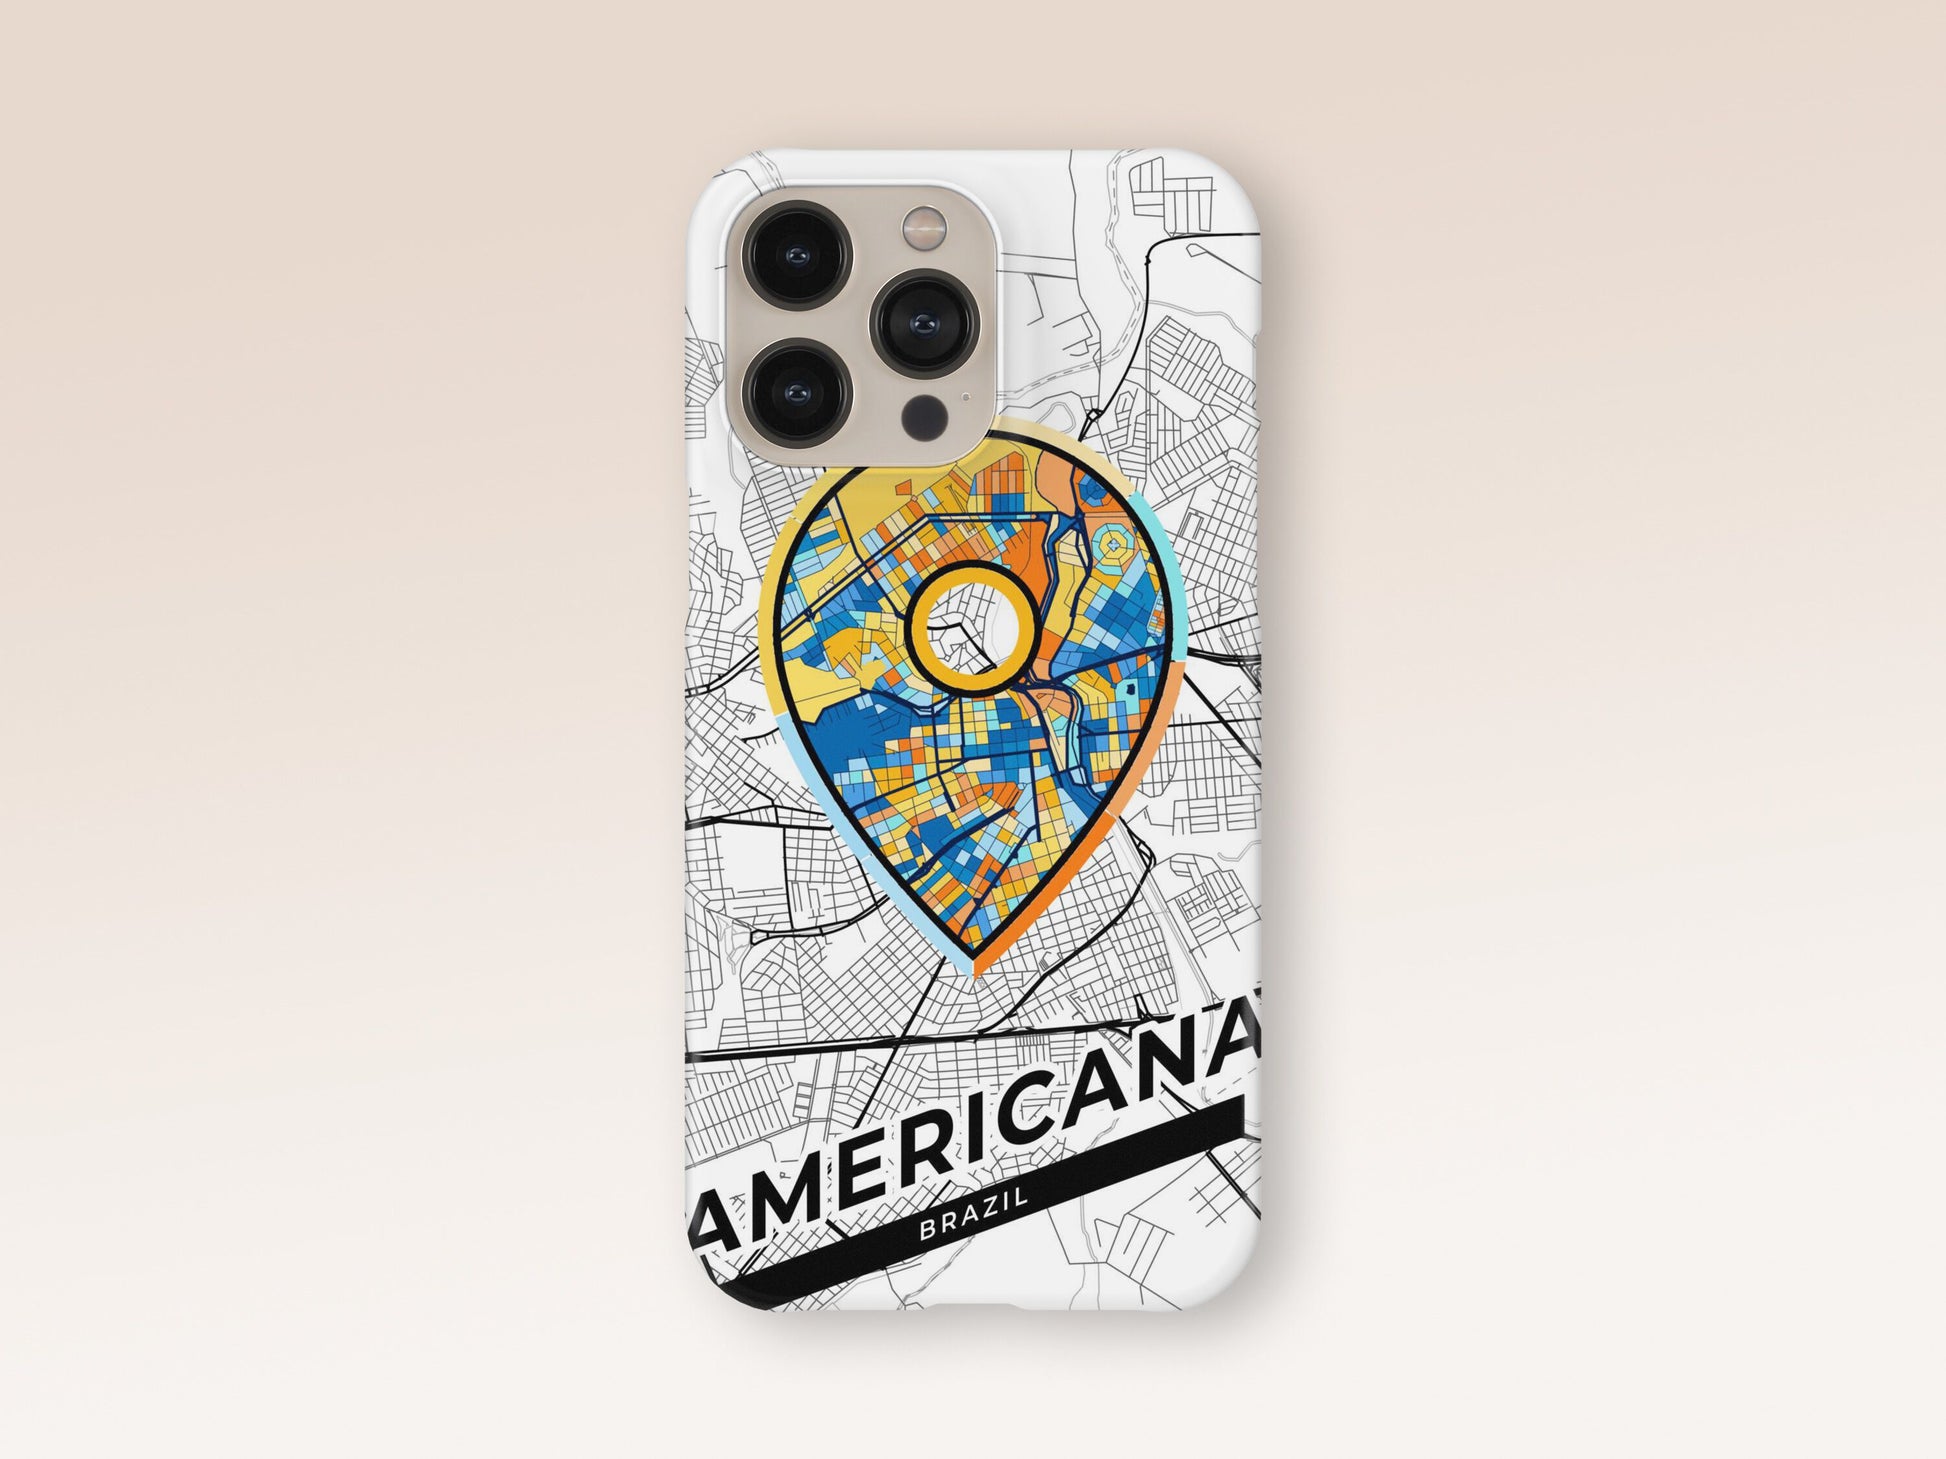 Americana Brazil slim phone case with colorful icon. Birthday, wedding or housewarming gift. Couple match cases. 1